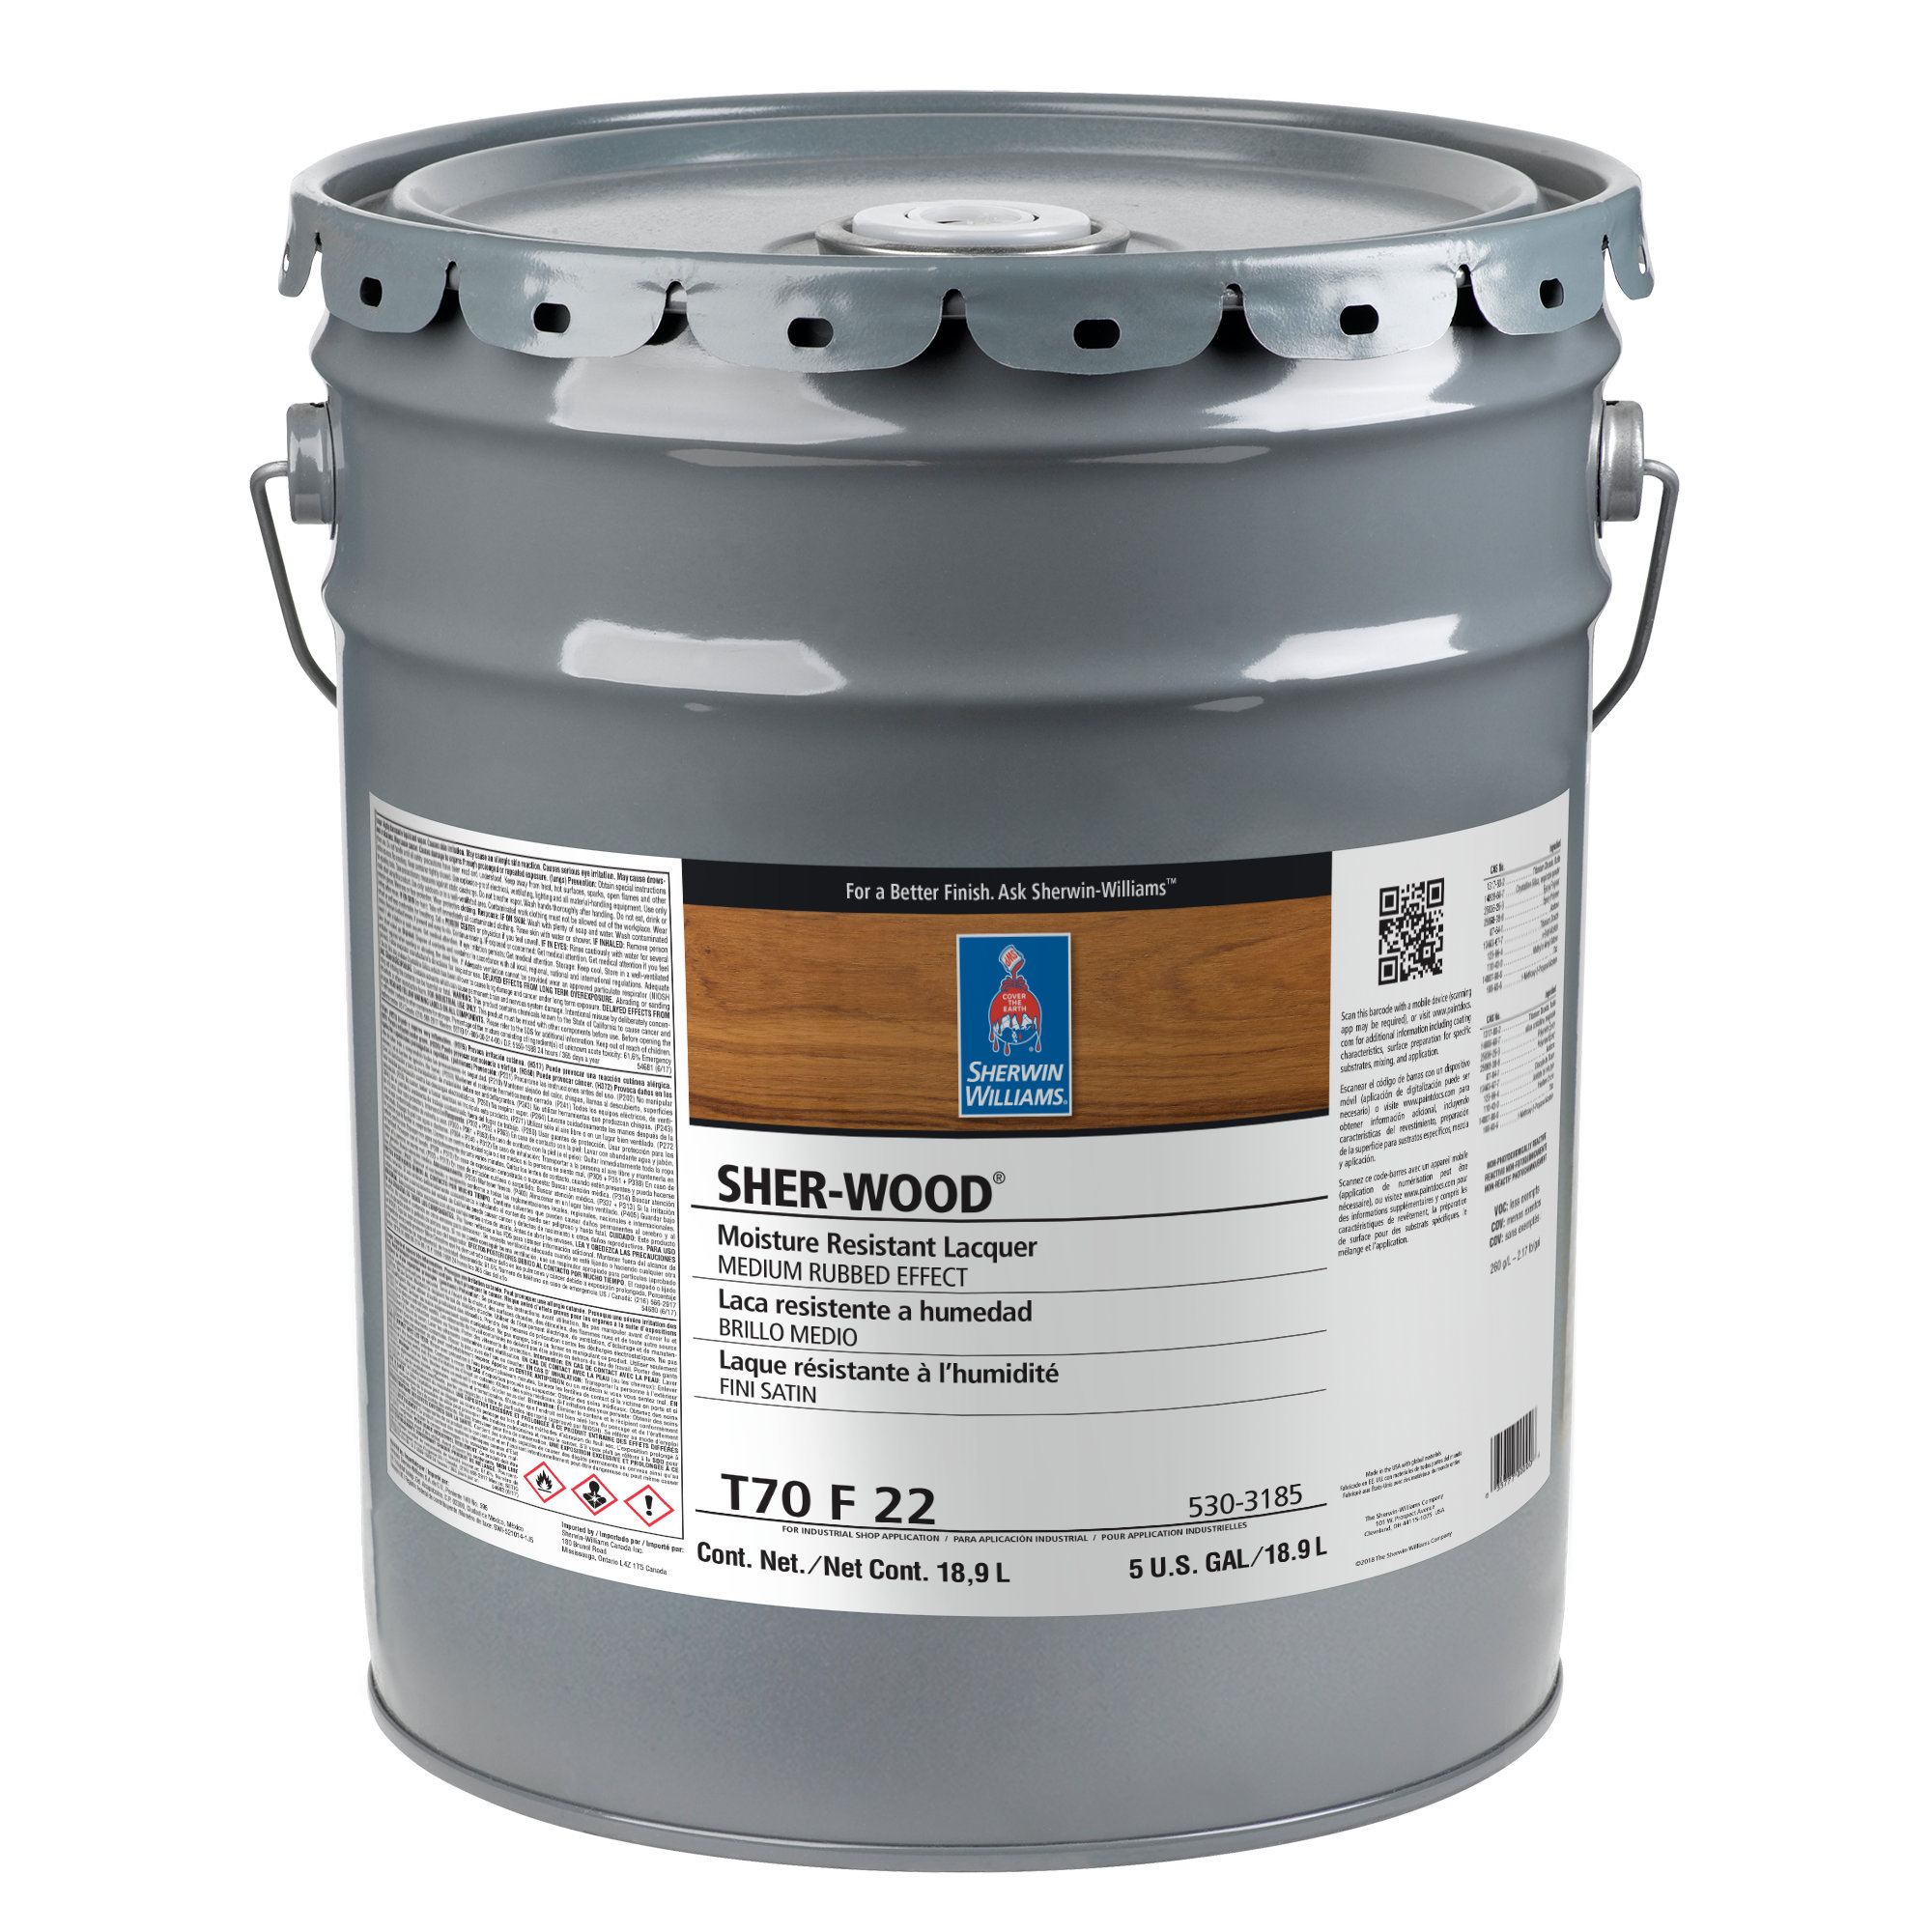 SHER-WOOD Moisture Resistant Lacquer